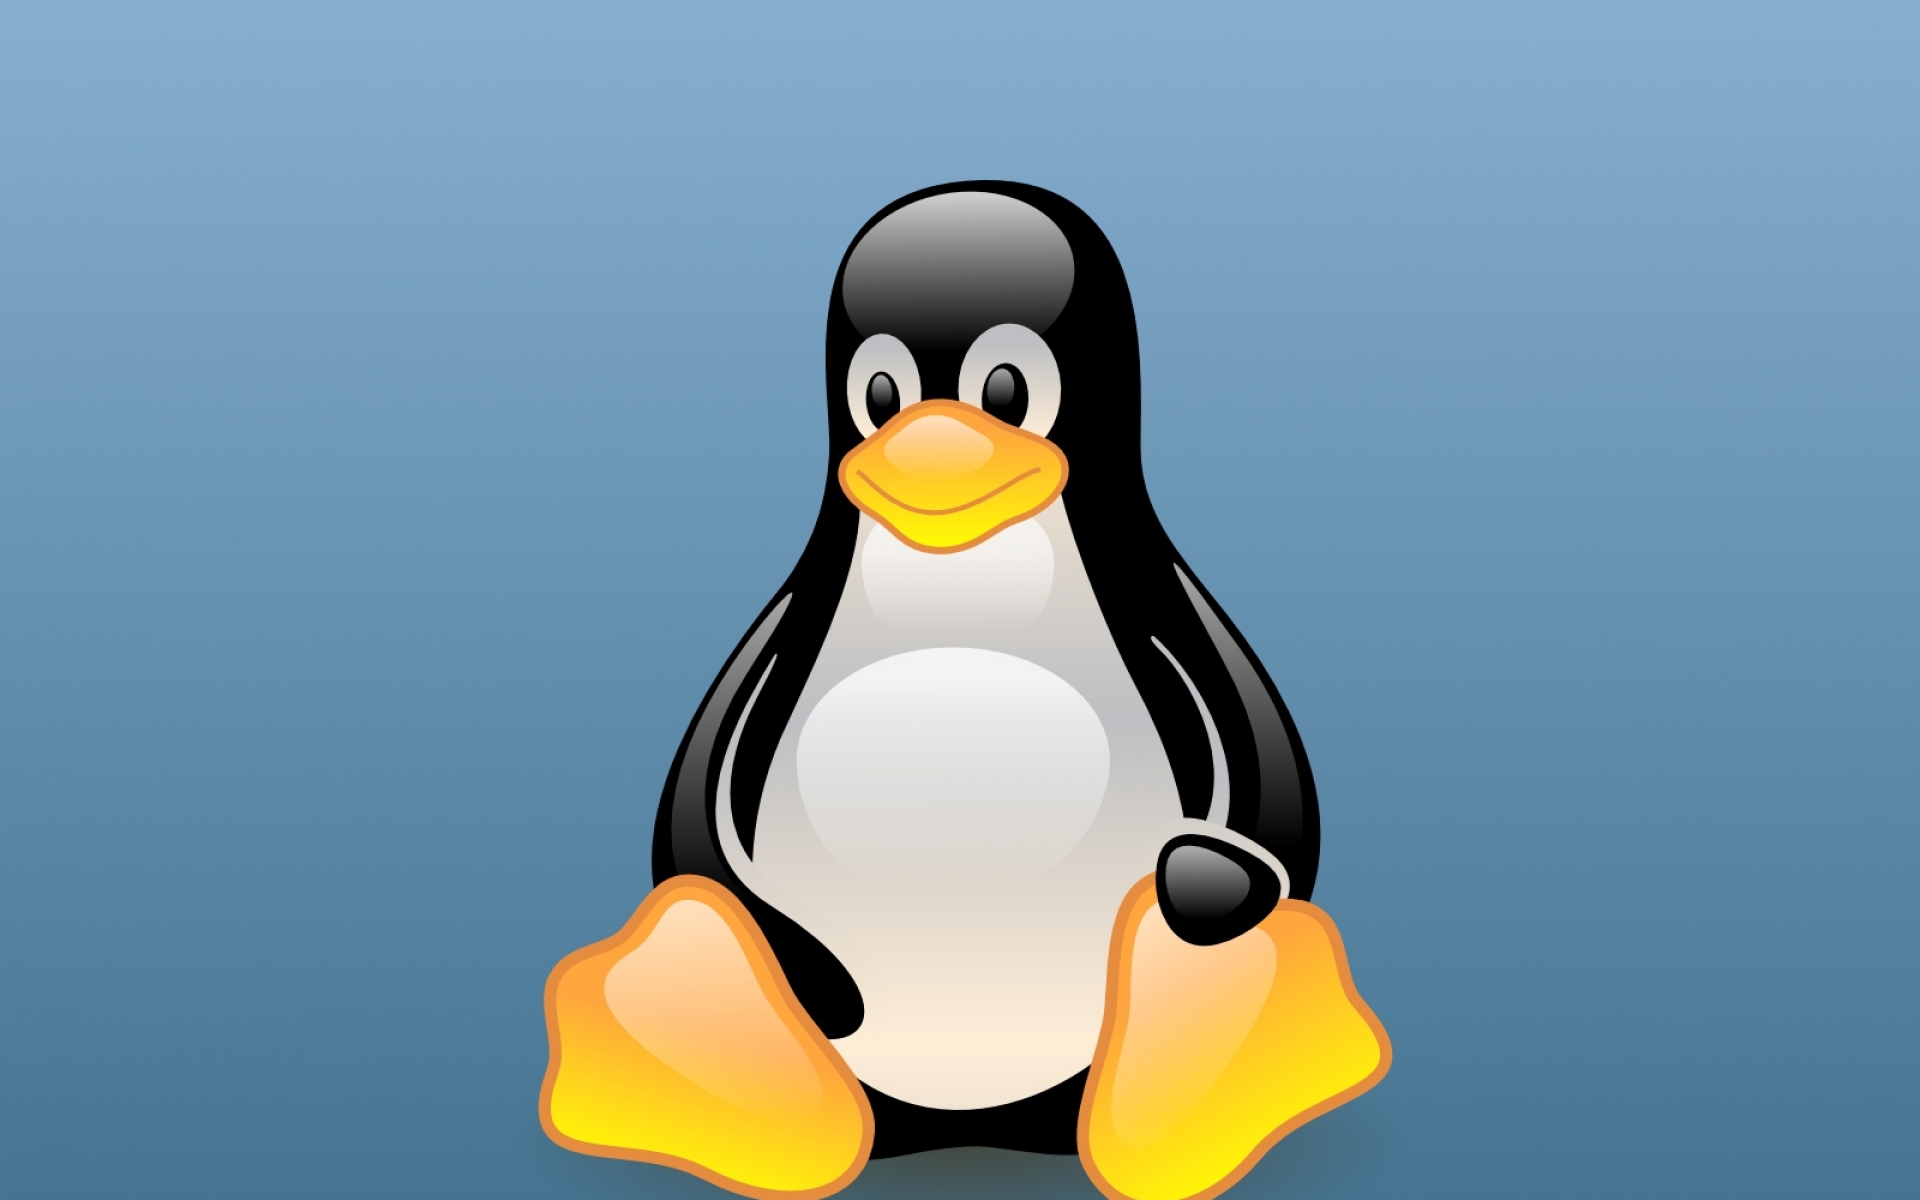 Linux machines can be 